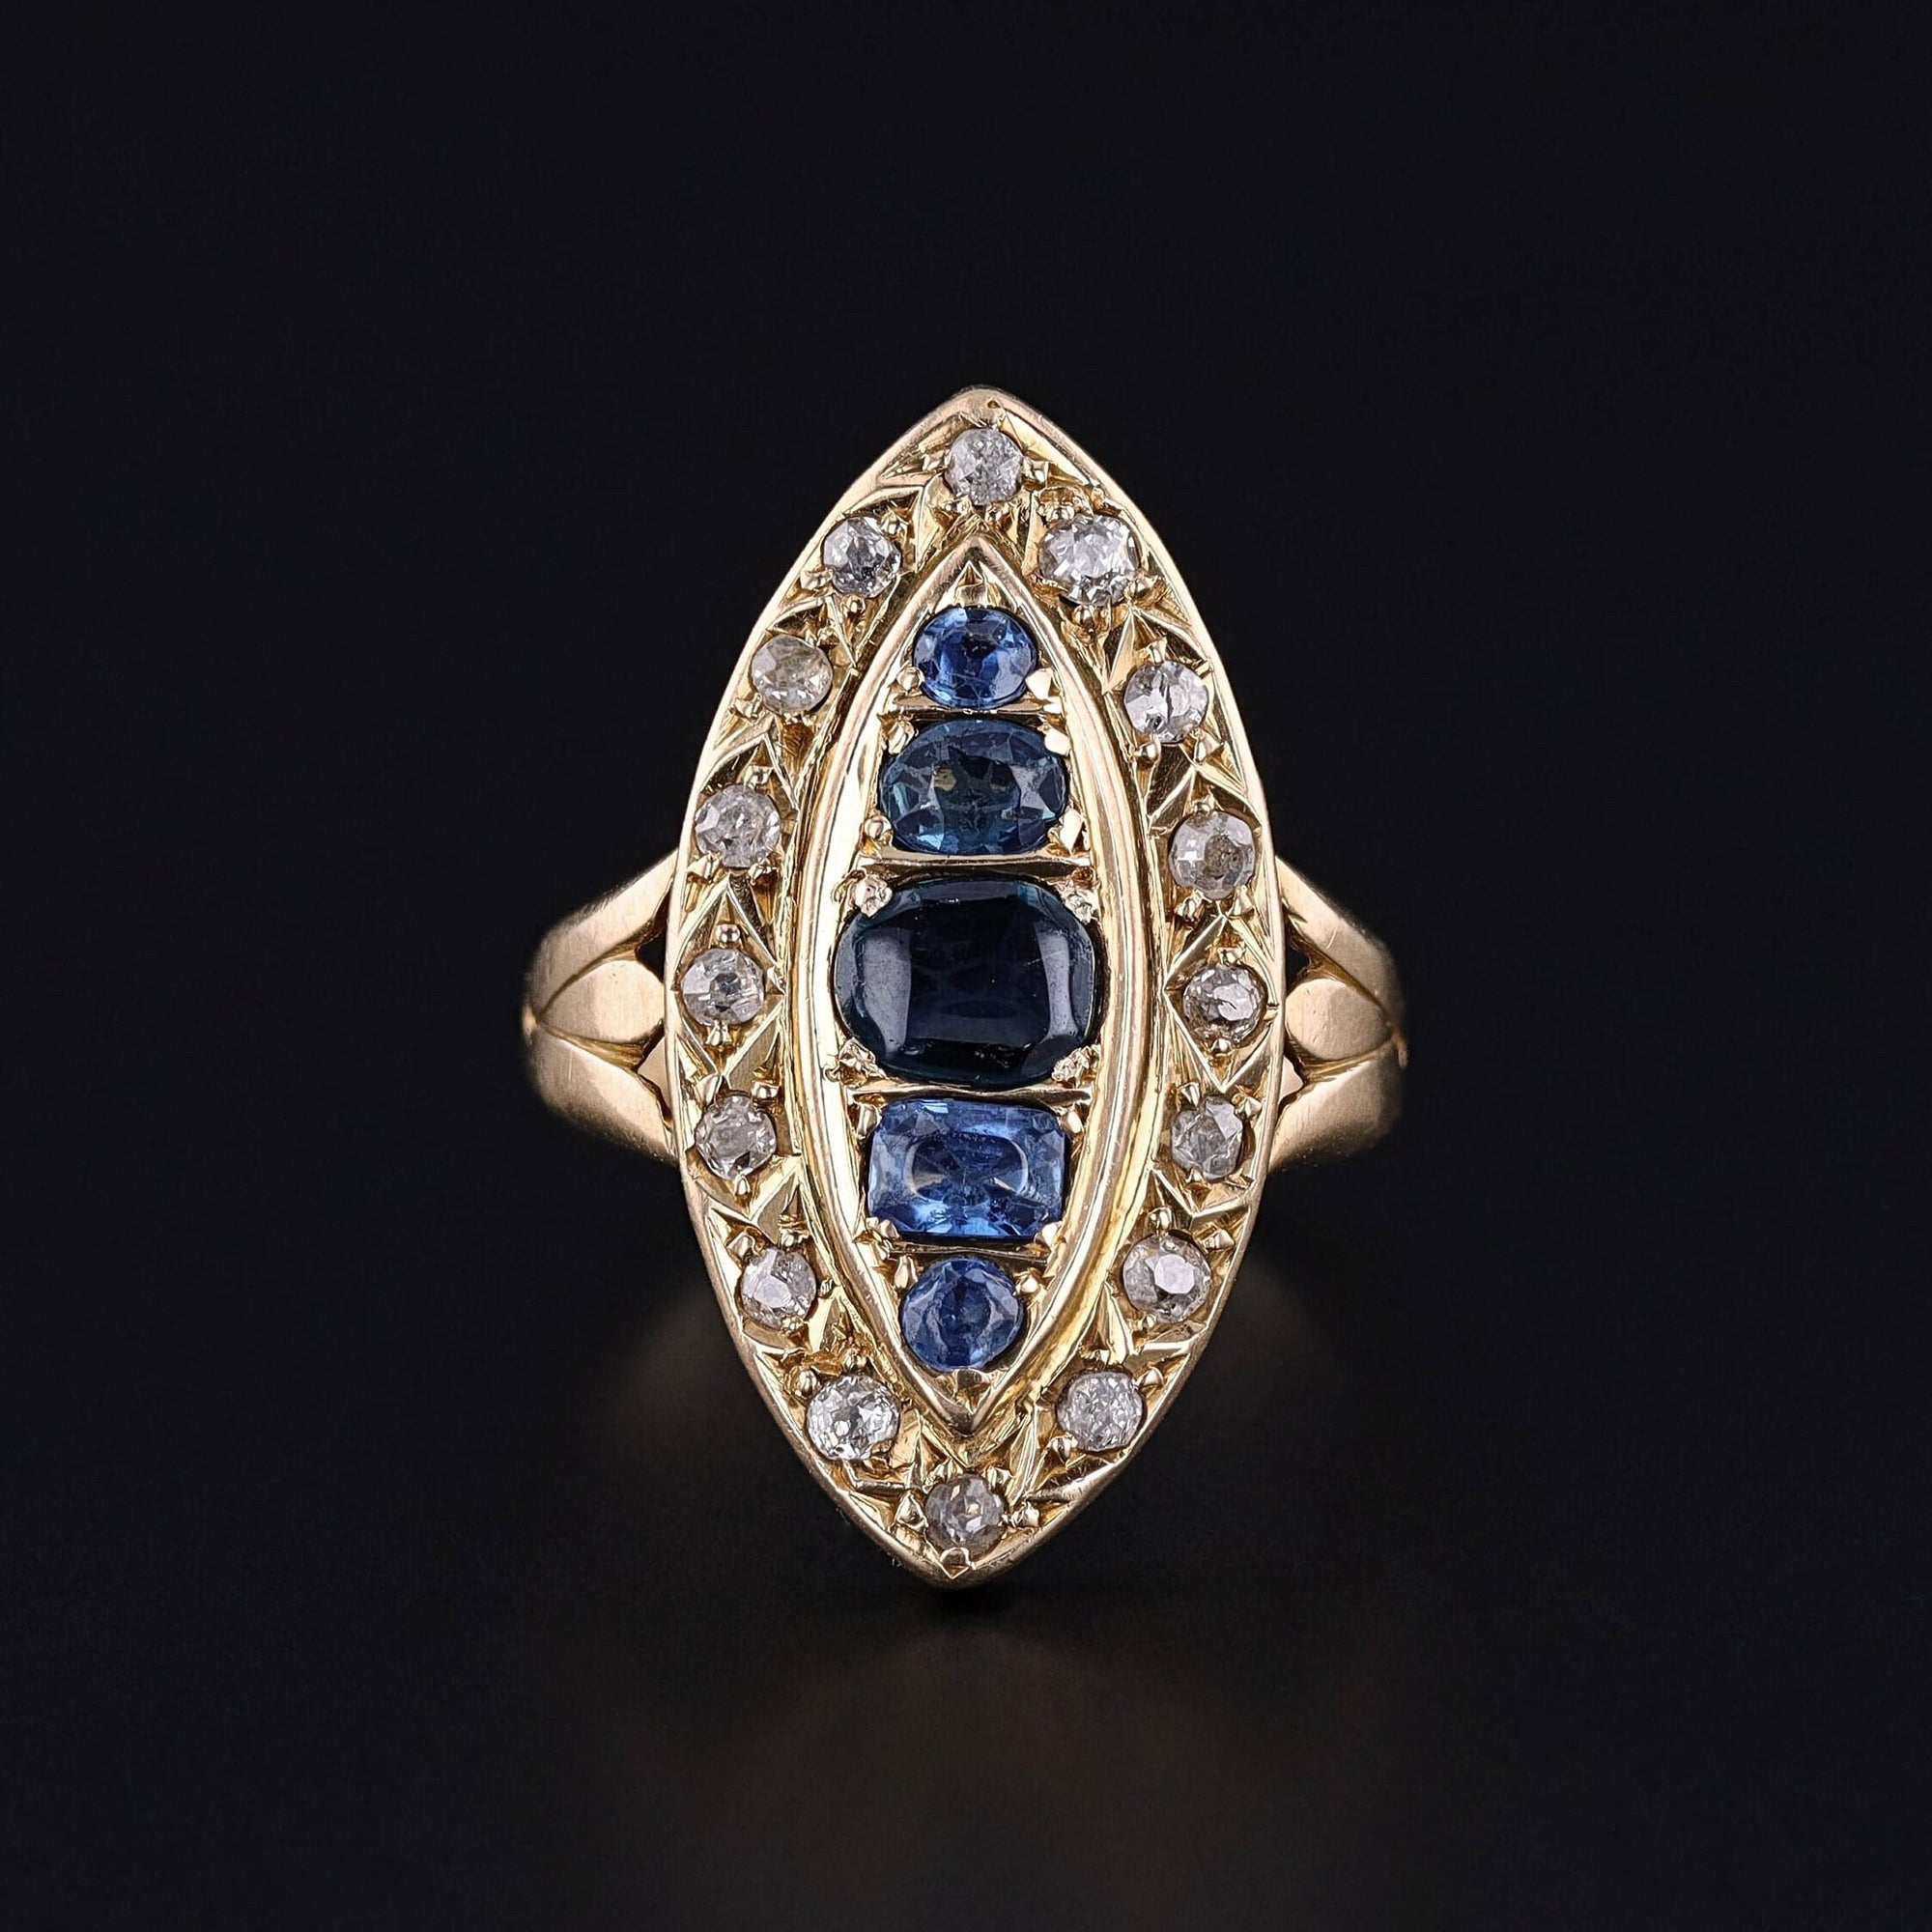 An antique ring from the late Victorian era showcasing a stunning navette design adorned with natural sapphires and old single cut diamonds mounted in 18k . The ring bears hallmarks indicating that it was assayed in Birmingham, England in 1893.